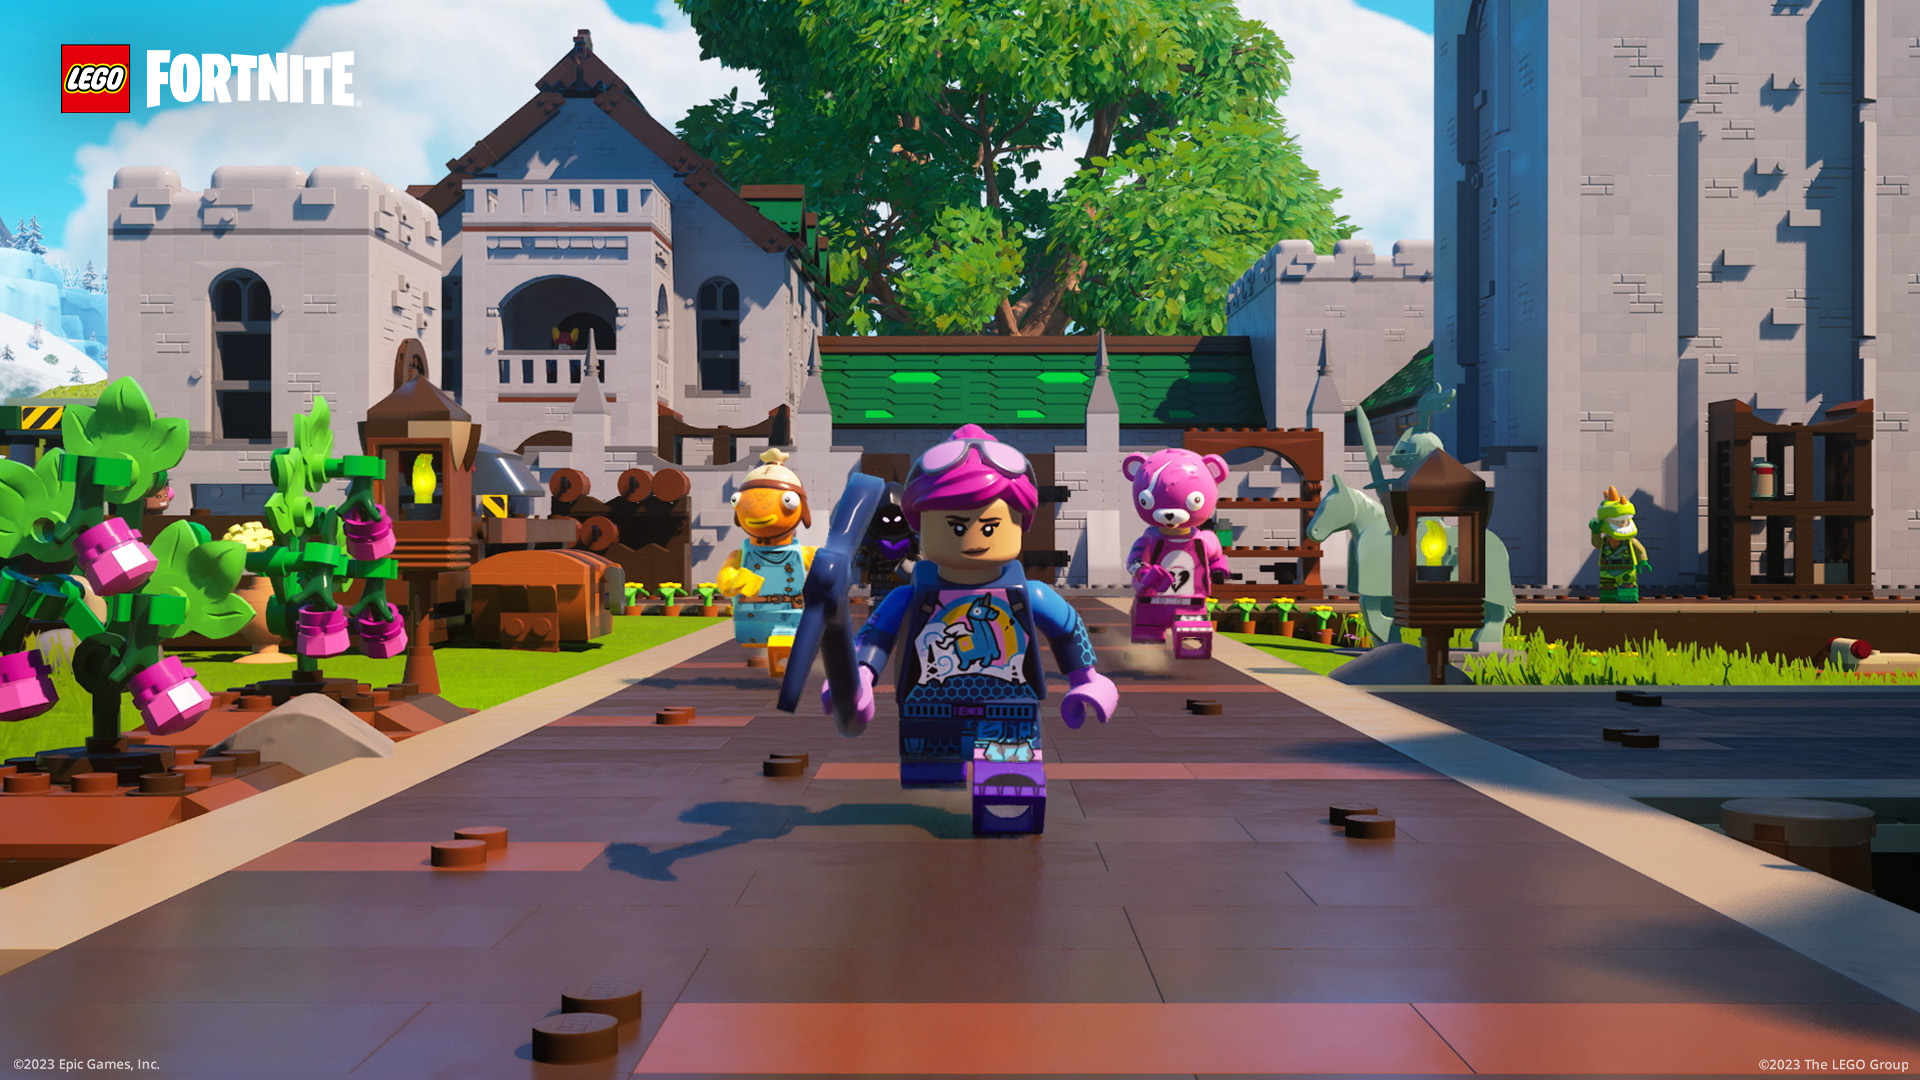 Brite Bomber, Fishstick, and Cuddly Bear Leader in Lego minifig form run through a castle-like area in a screenshot from Lego Fortnite